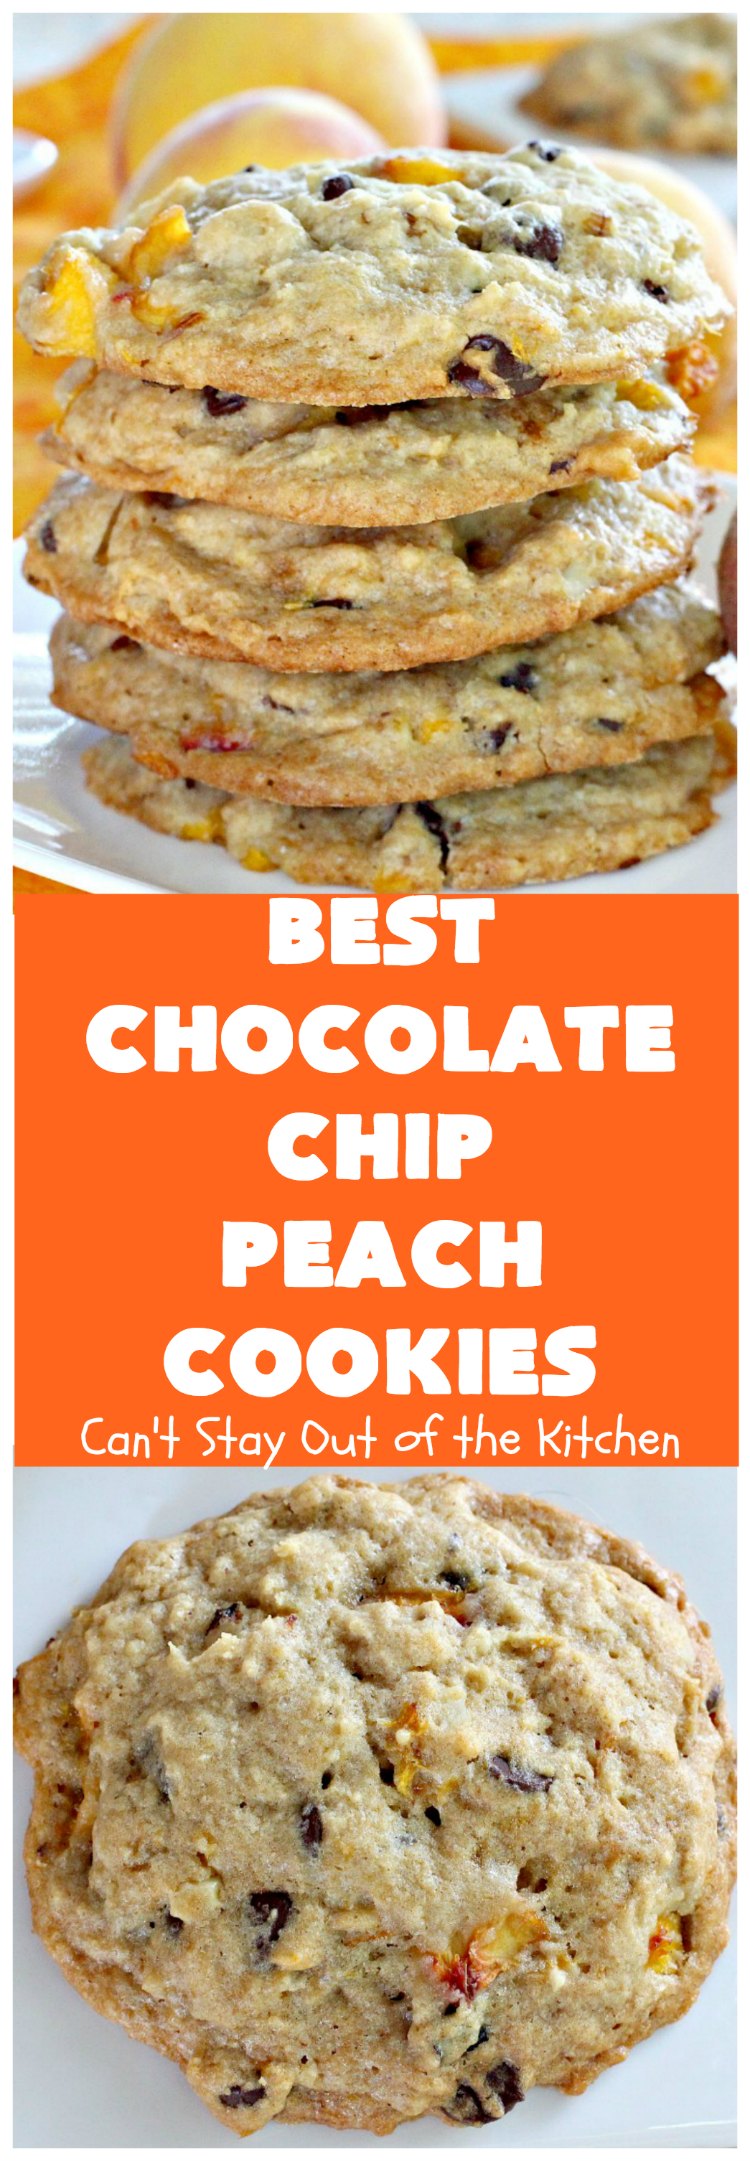 Best Chocolate Chip Peach Cookies | Can't Stay Out of the Kitchen